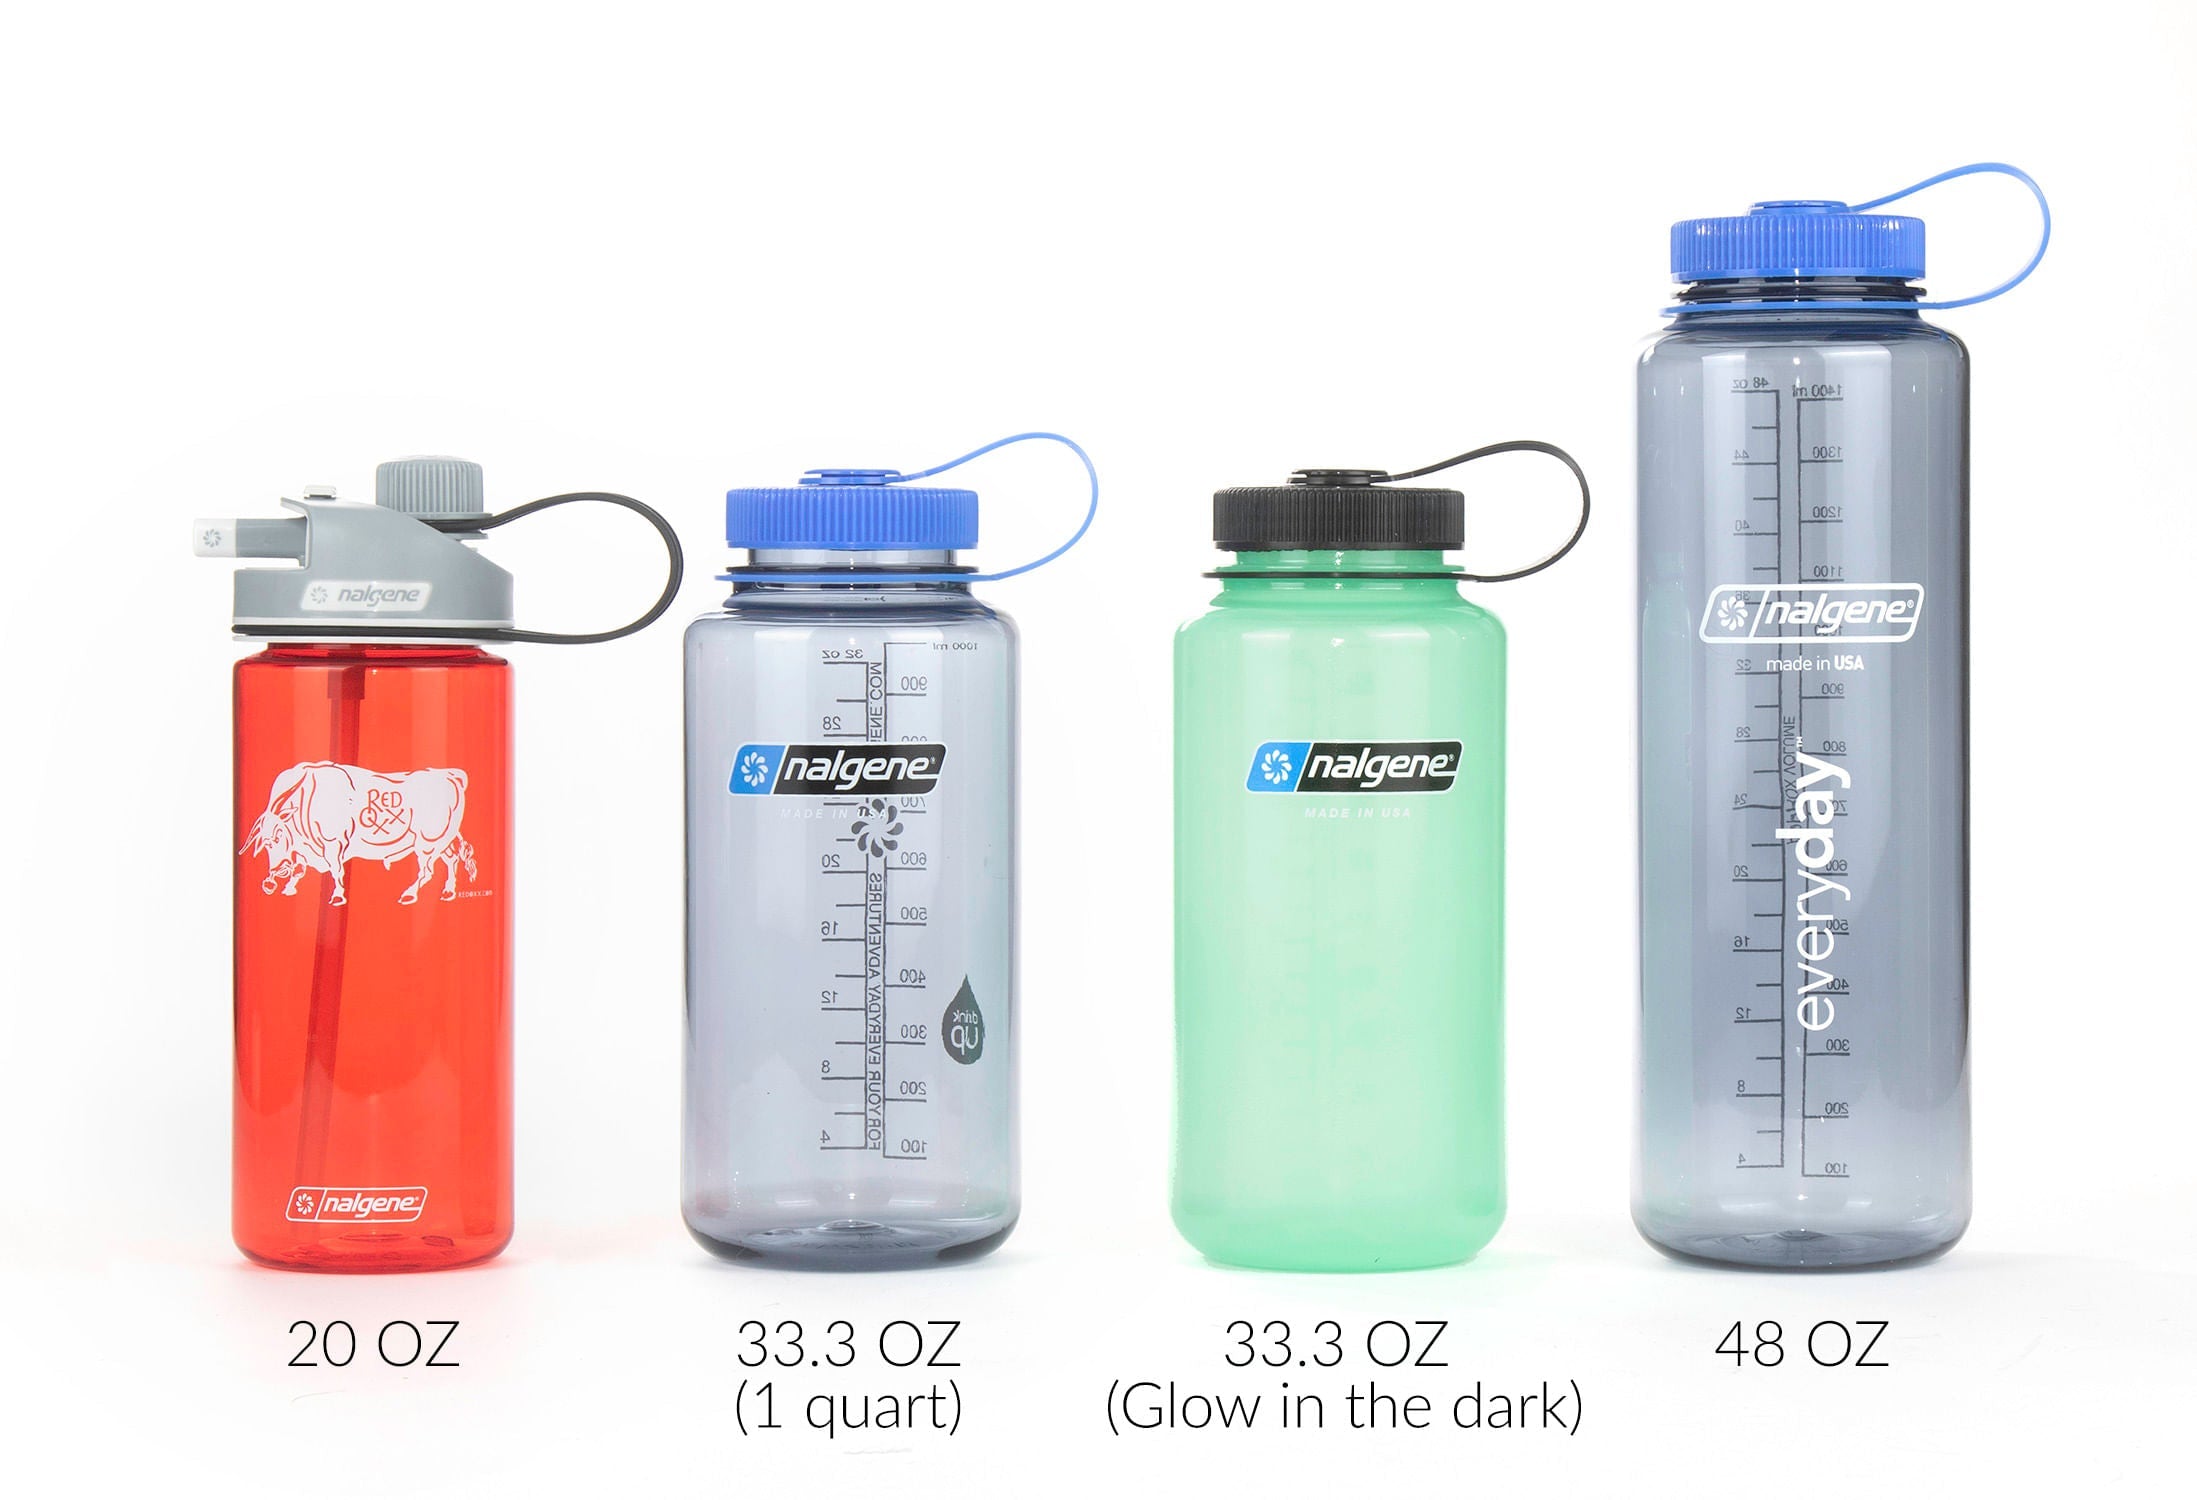 from left to right, Nalgene 20 ounce, 33.3 ounce, 33.3 ounce glow in dark,48 ounce.